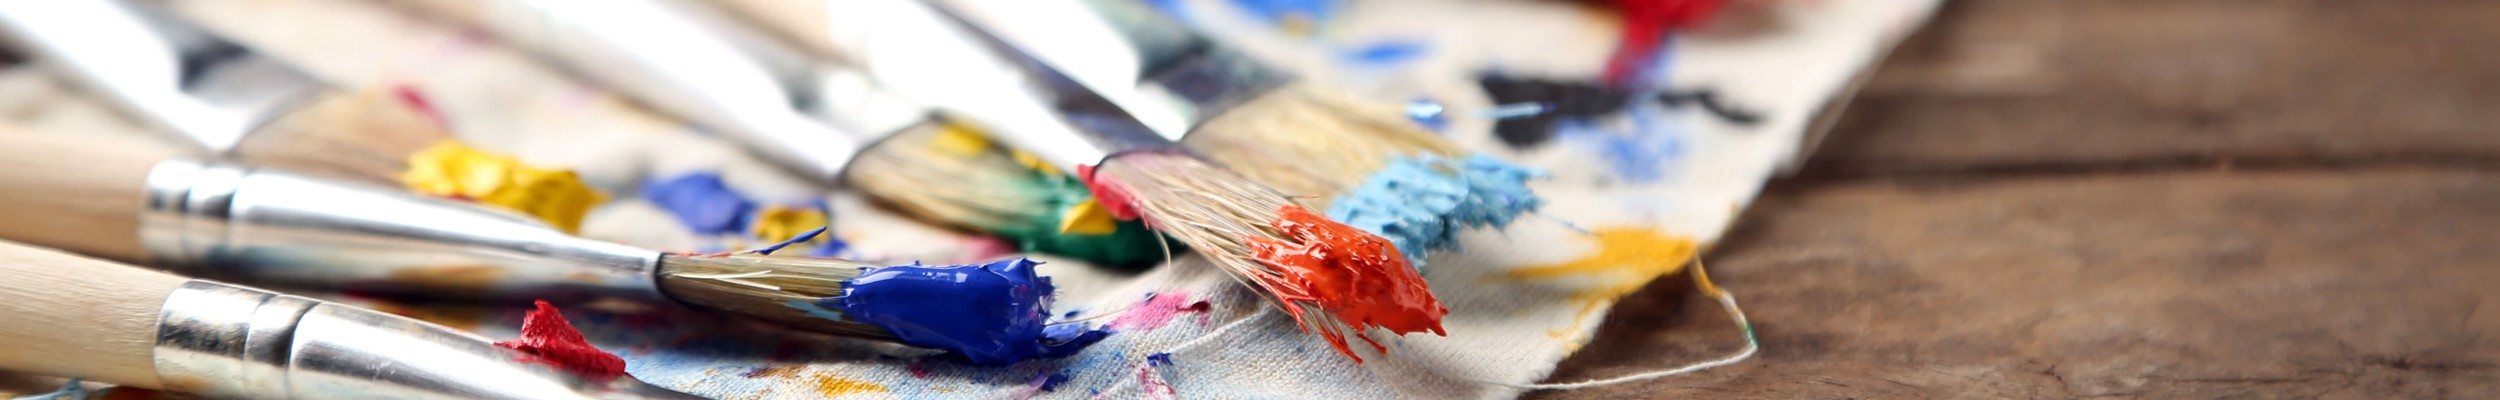 Brushes with paint on fabric